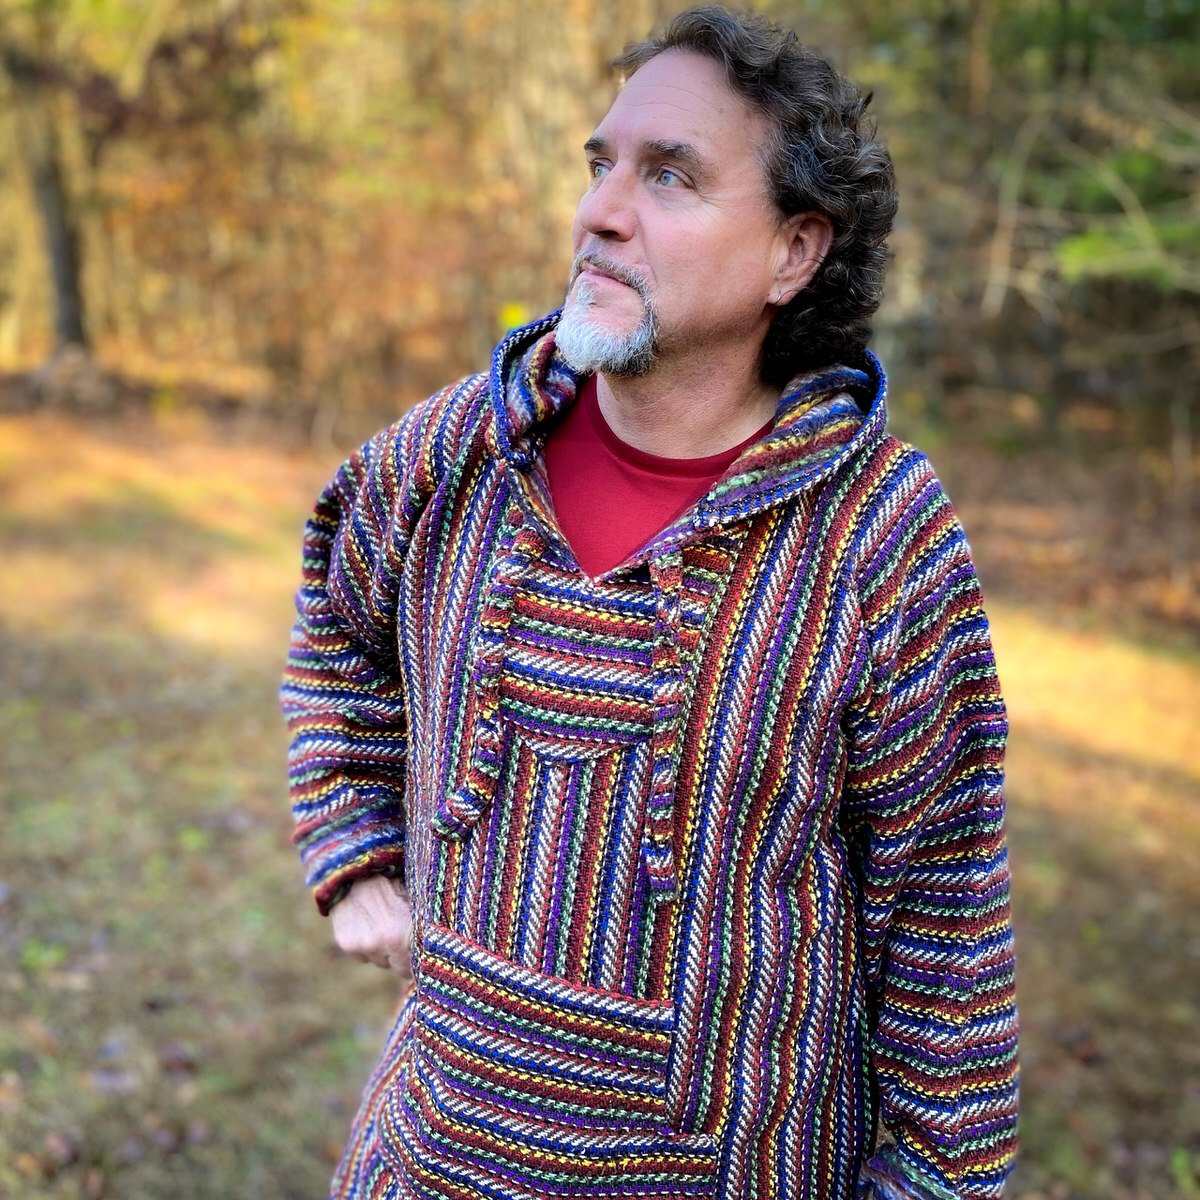 Male model with curly dark brown hair and grey goatee, wearing a Baja hoodie jacket with narrow stripes, woven in shades of red, purple, dark blue, yellow and white. Grass and trees in background.